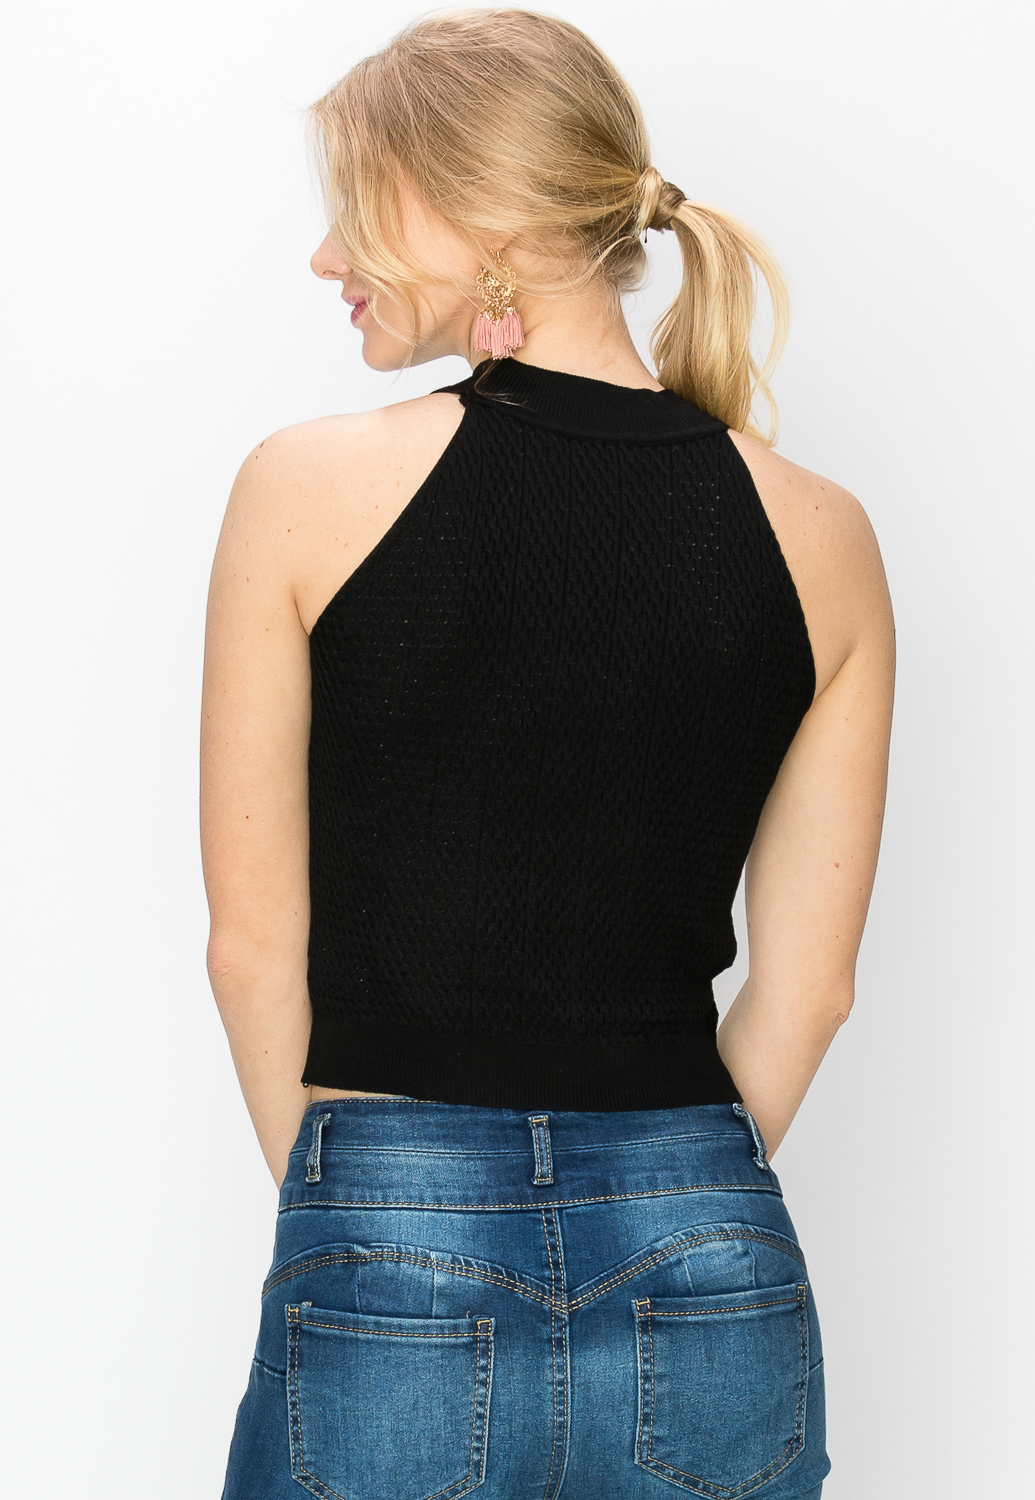 Knit Casual Tank Top 